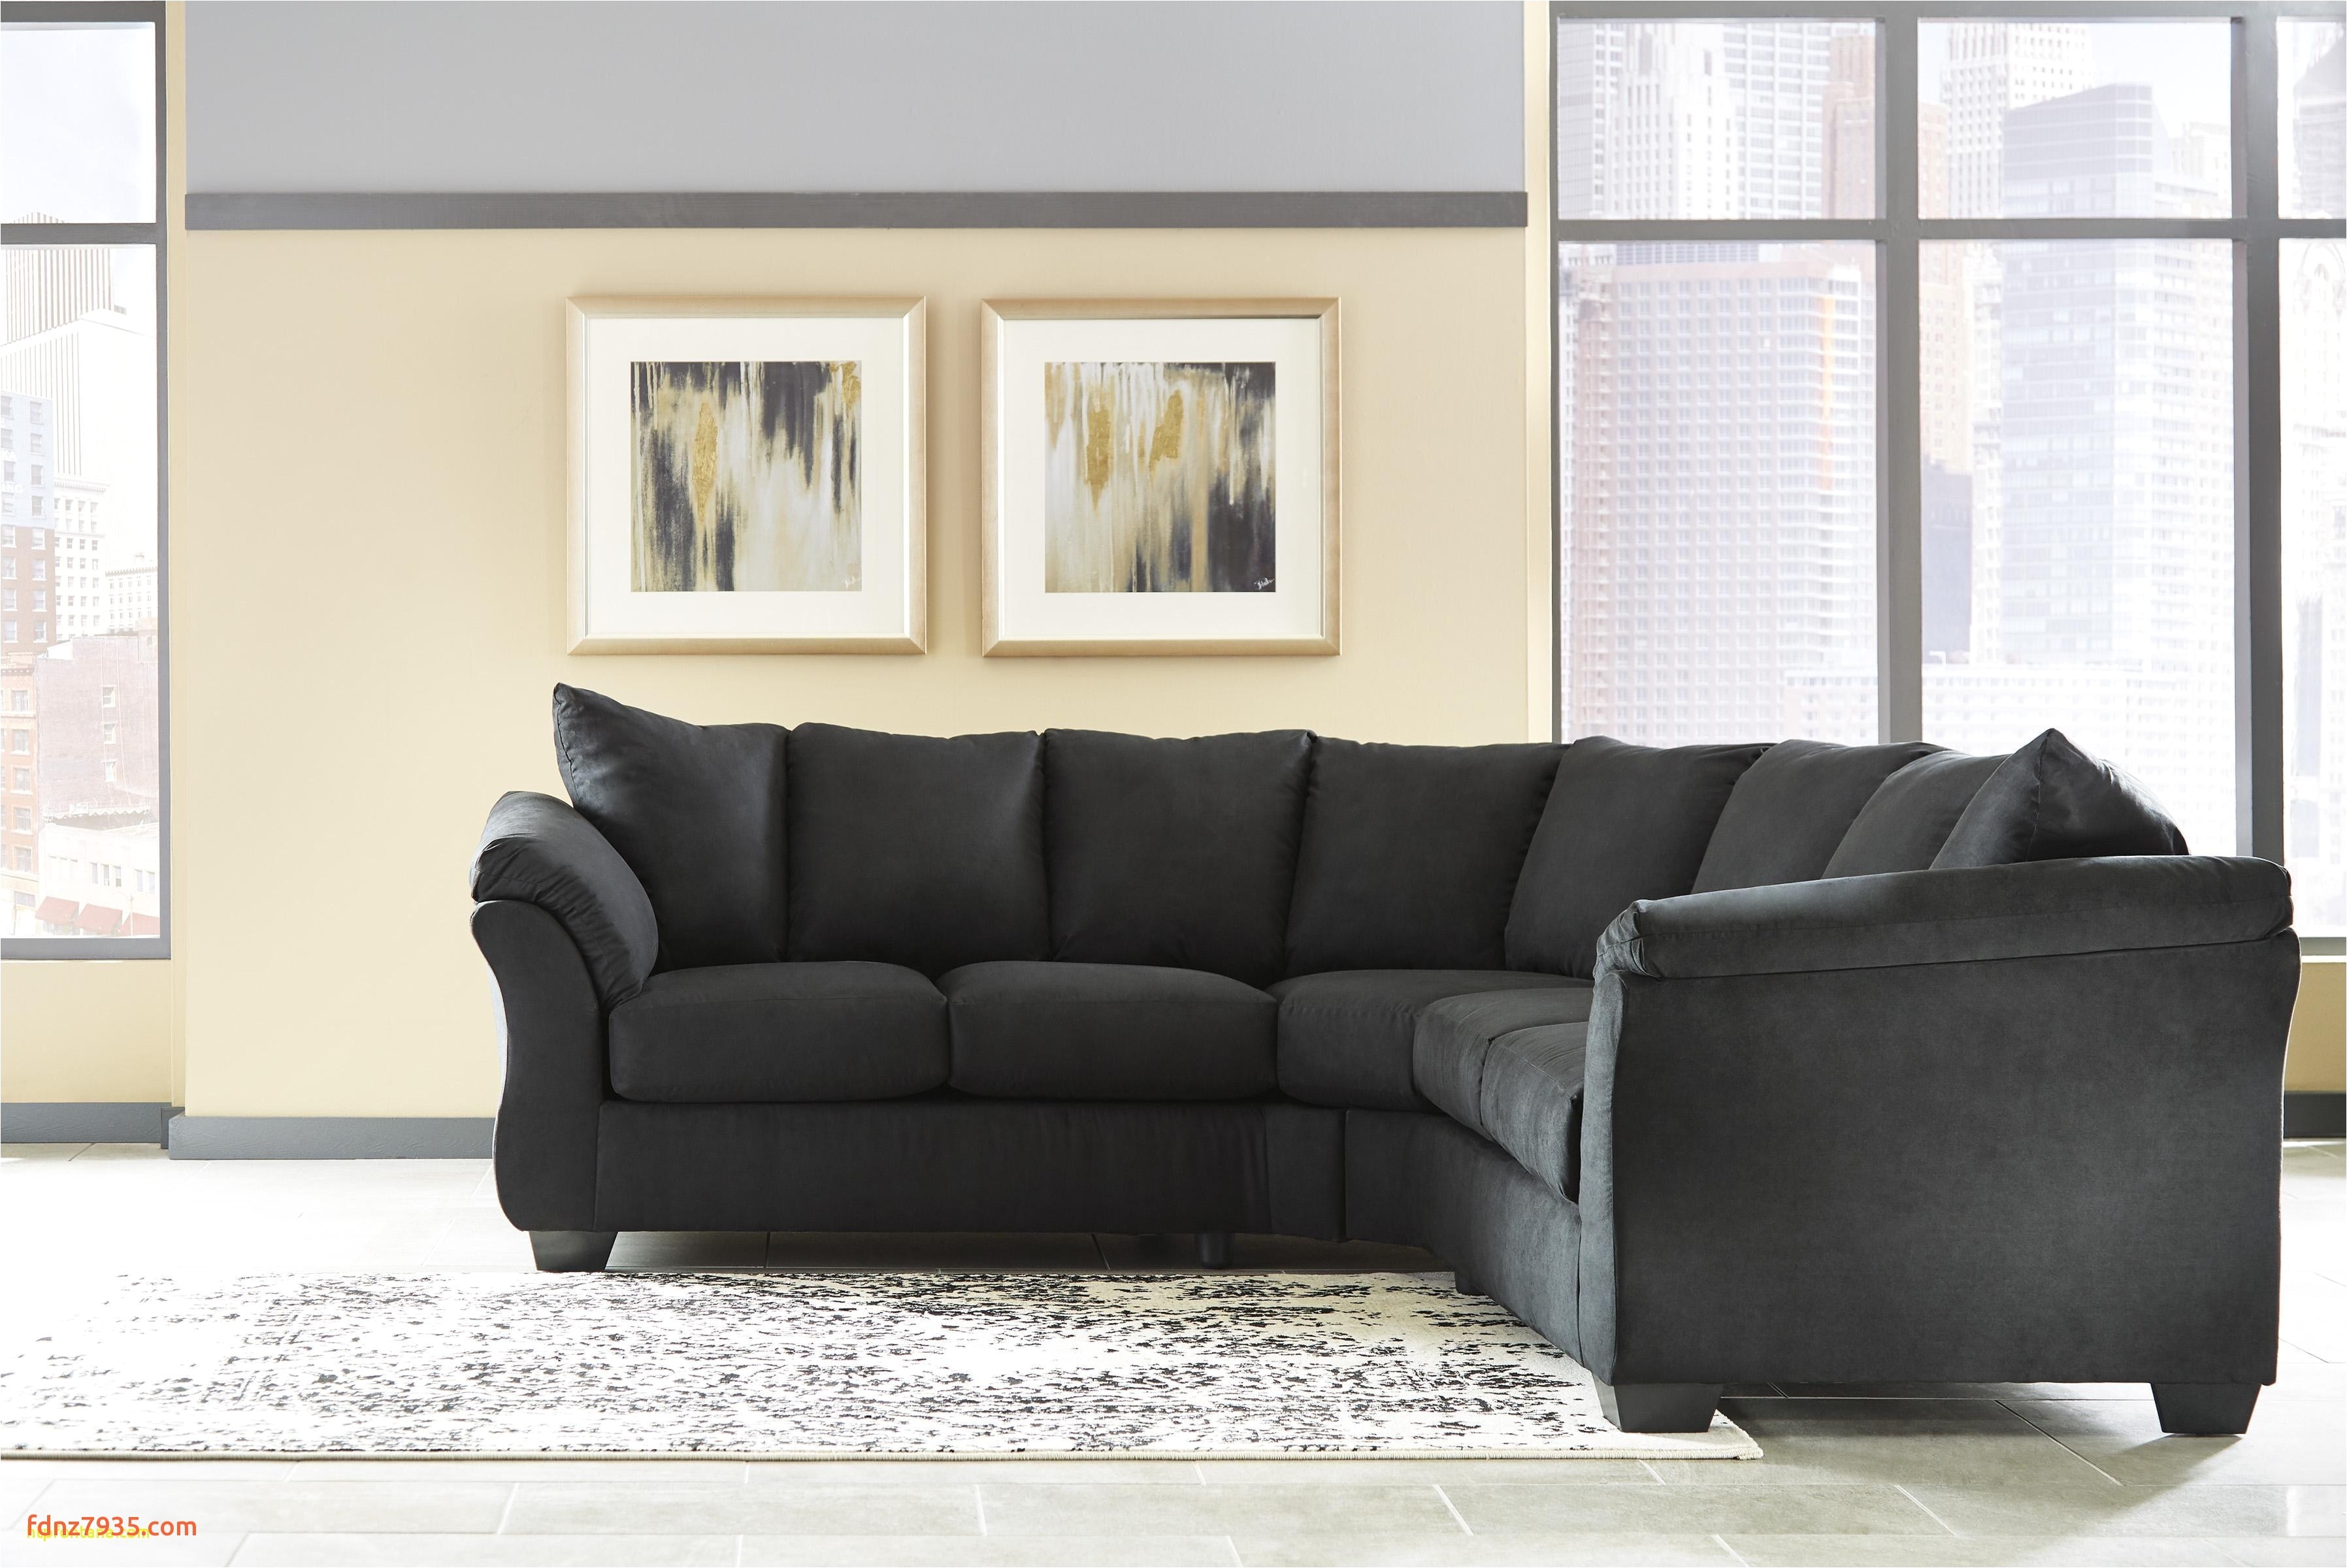 couch or sofa unique living room ideas using grey luxury with sectional sofas couch 0d